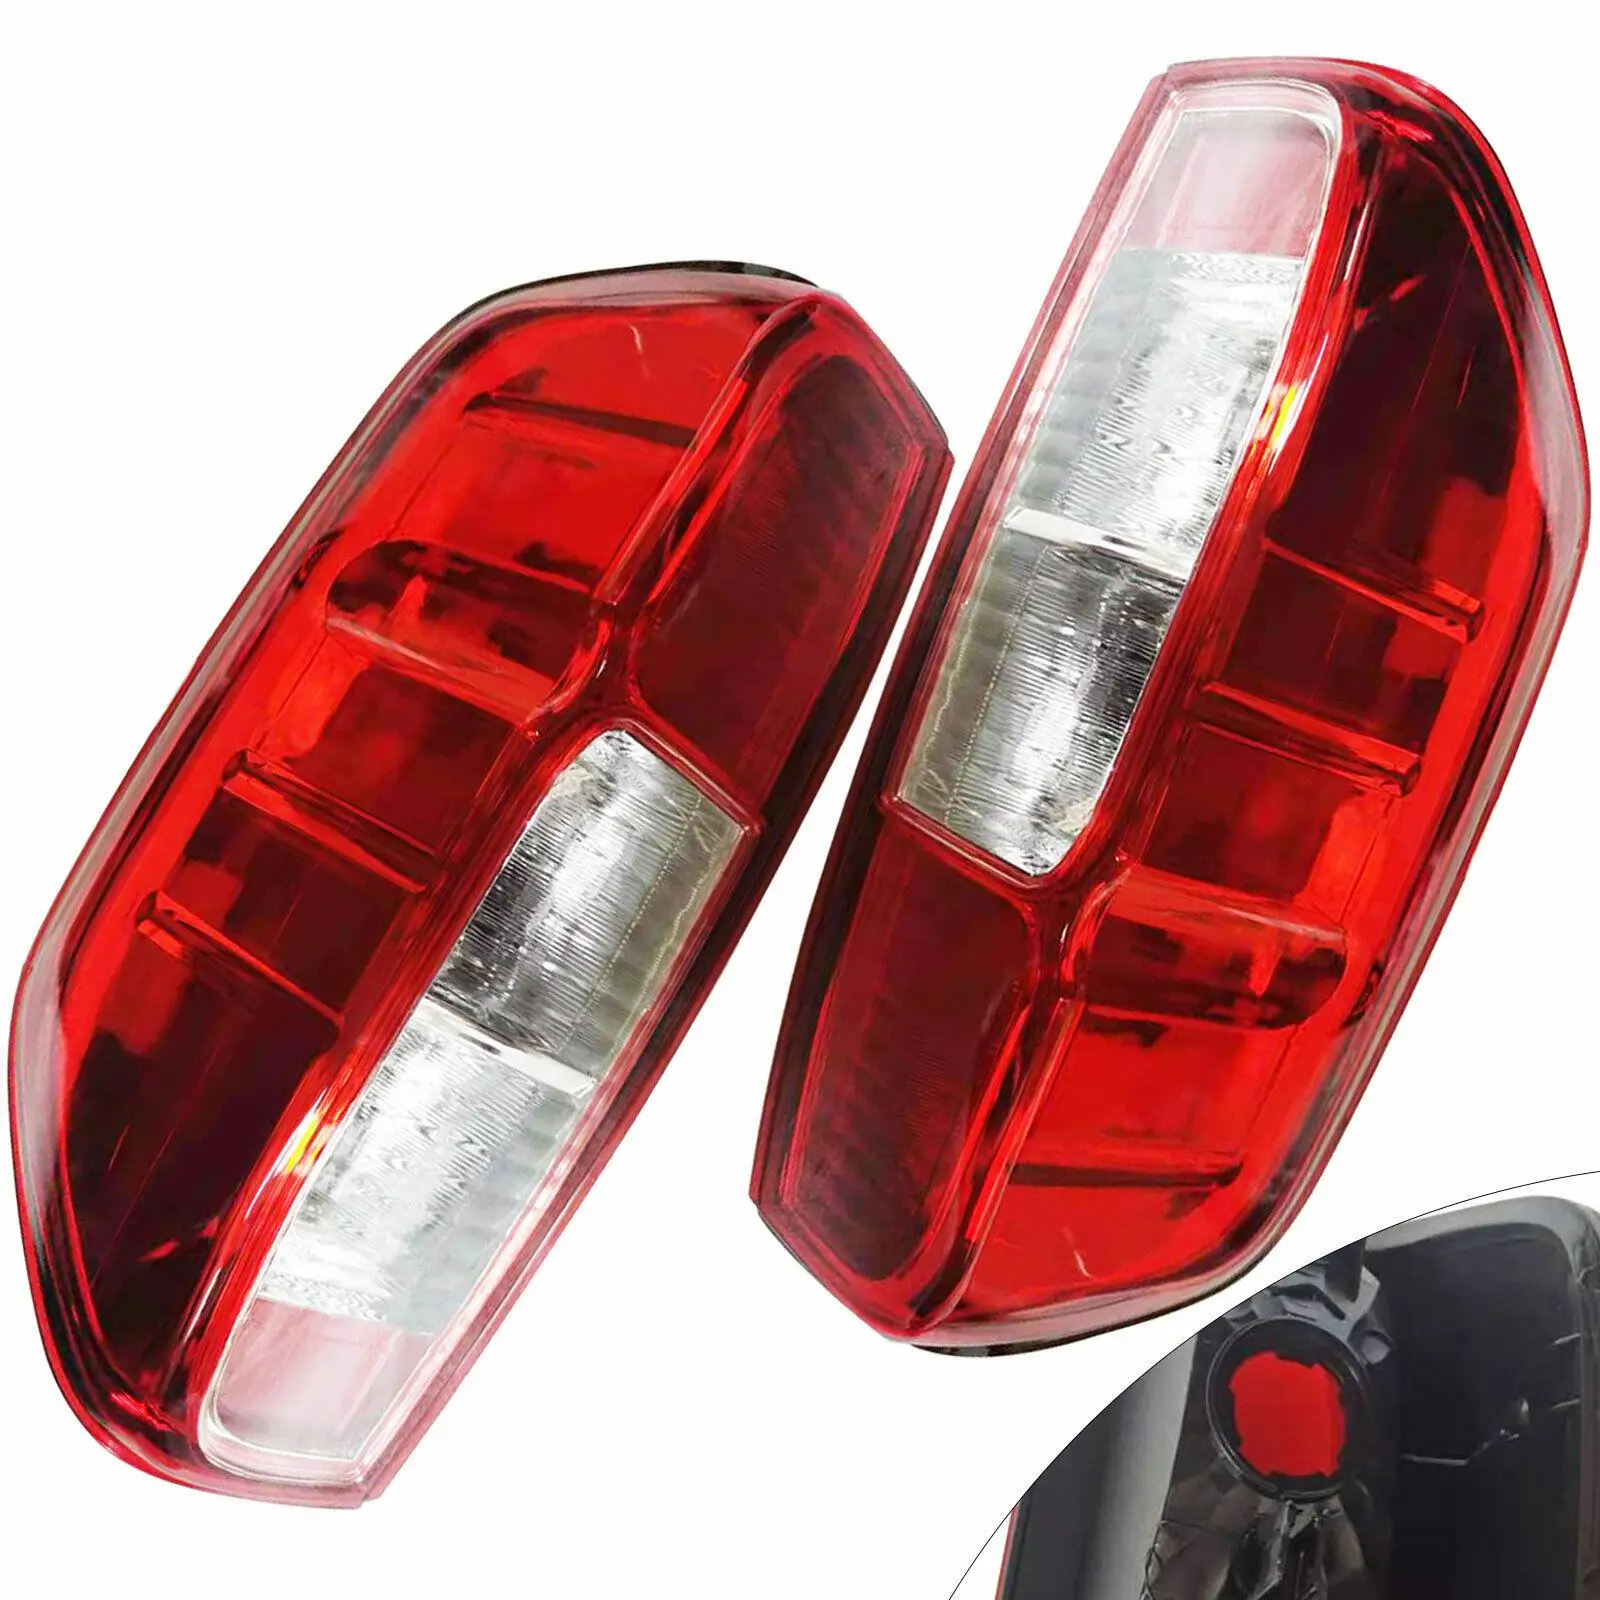 Pair Left & Right Rear Brake Lamps Tail Lights Taillamps for Nissan Frontier 2005-2015 Red Lens for audi q3 2012 2015 2016 2018 car rear side lower bumper fog lamps tail light red reverse brake halogen auto lower